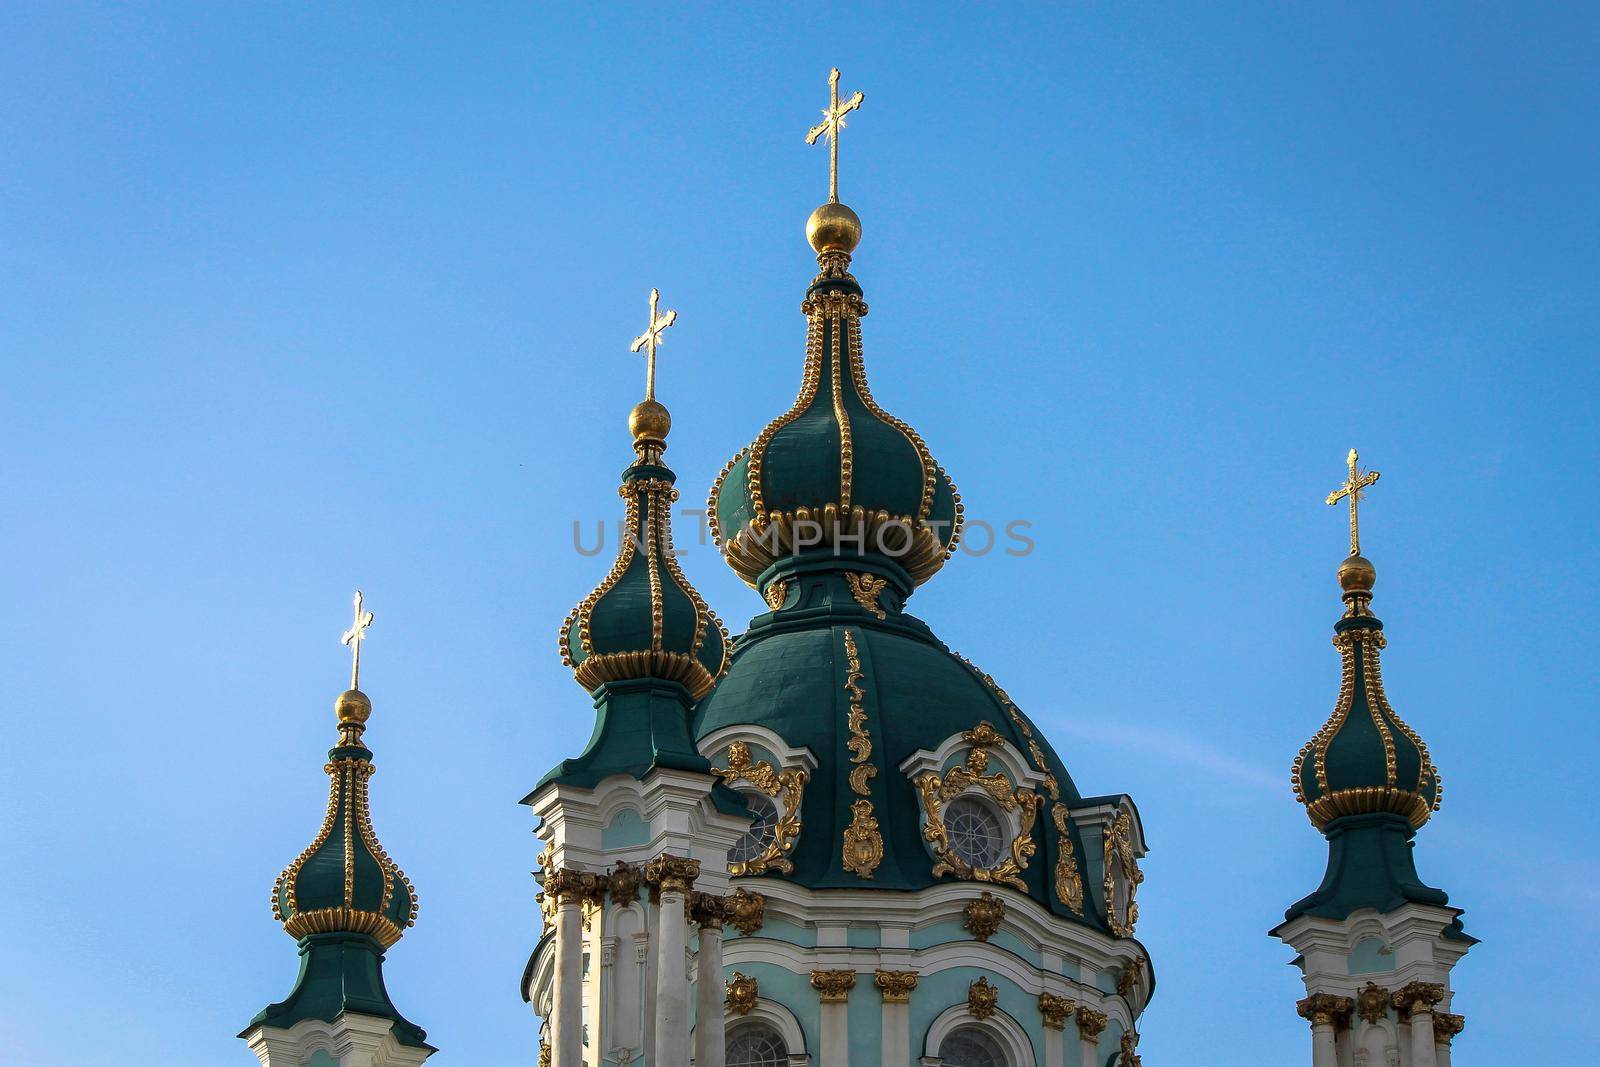 Green domes of the Kiev-Pechersk Lavra church against the blue sky. High quality photo